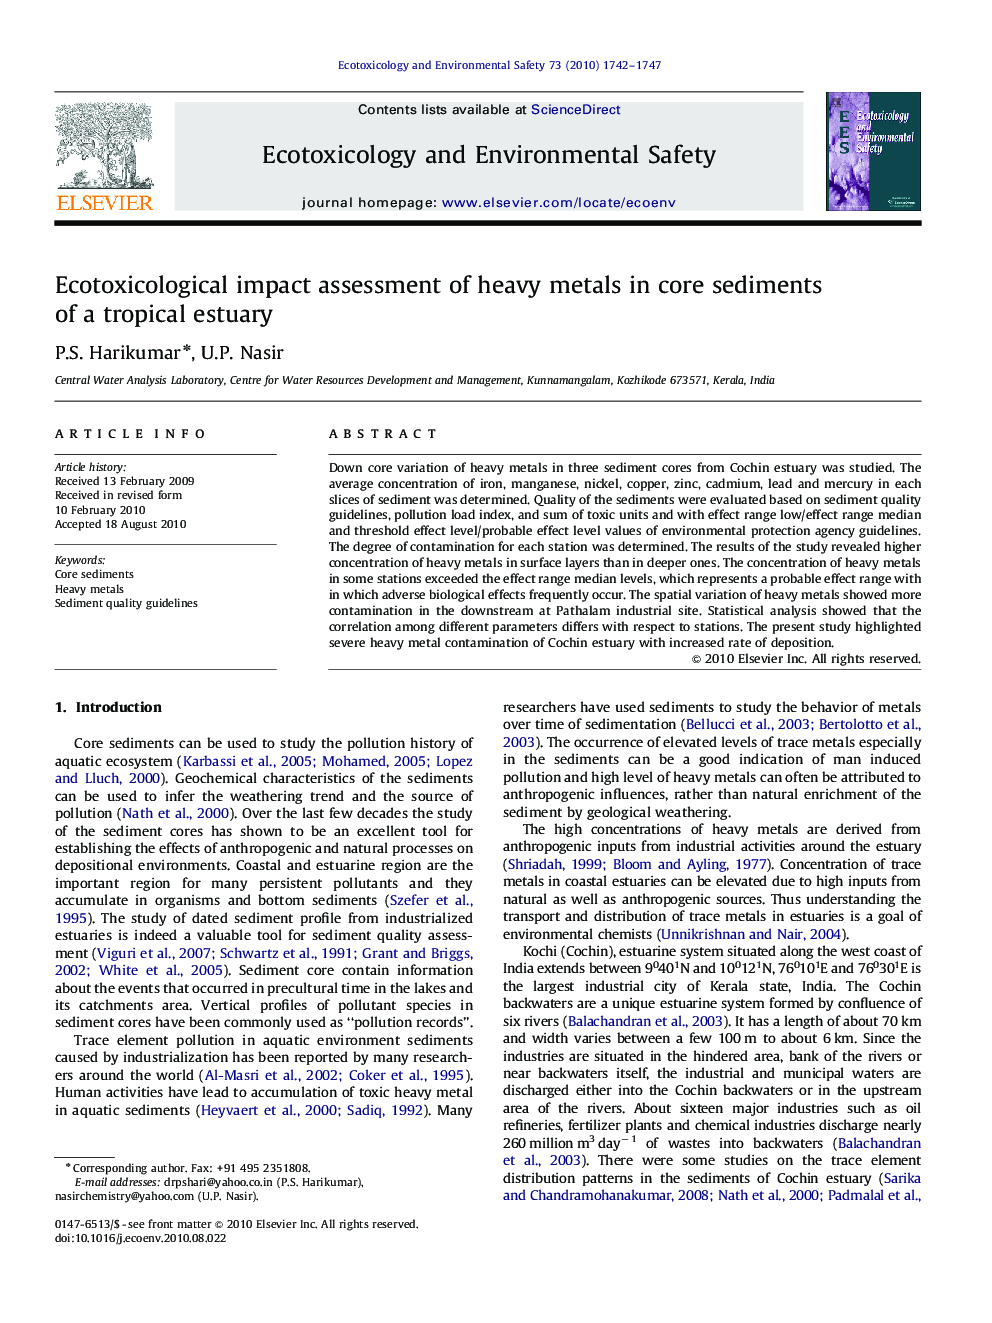 Ecotoxicological impact assessment of heavy metals in core sediments of a tropical estuary